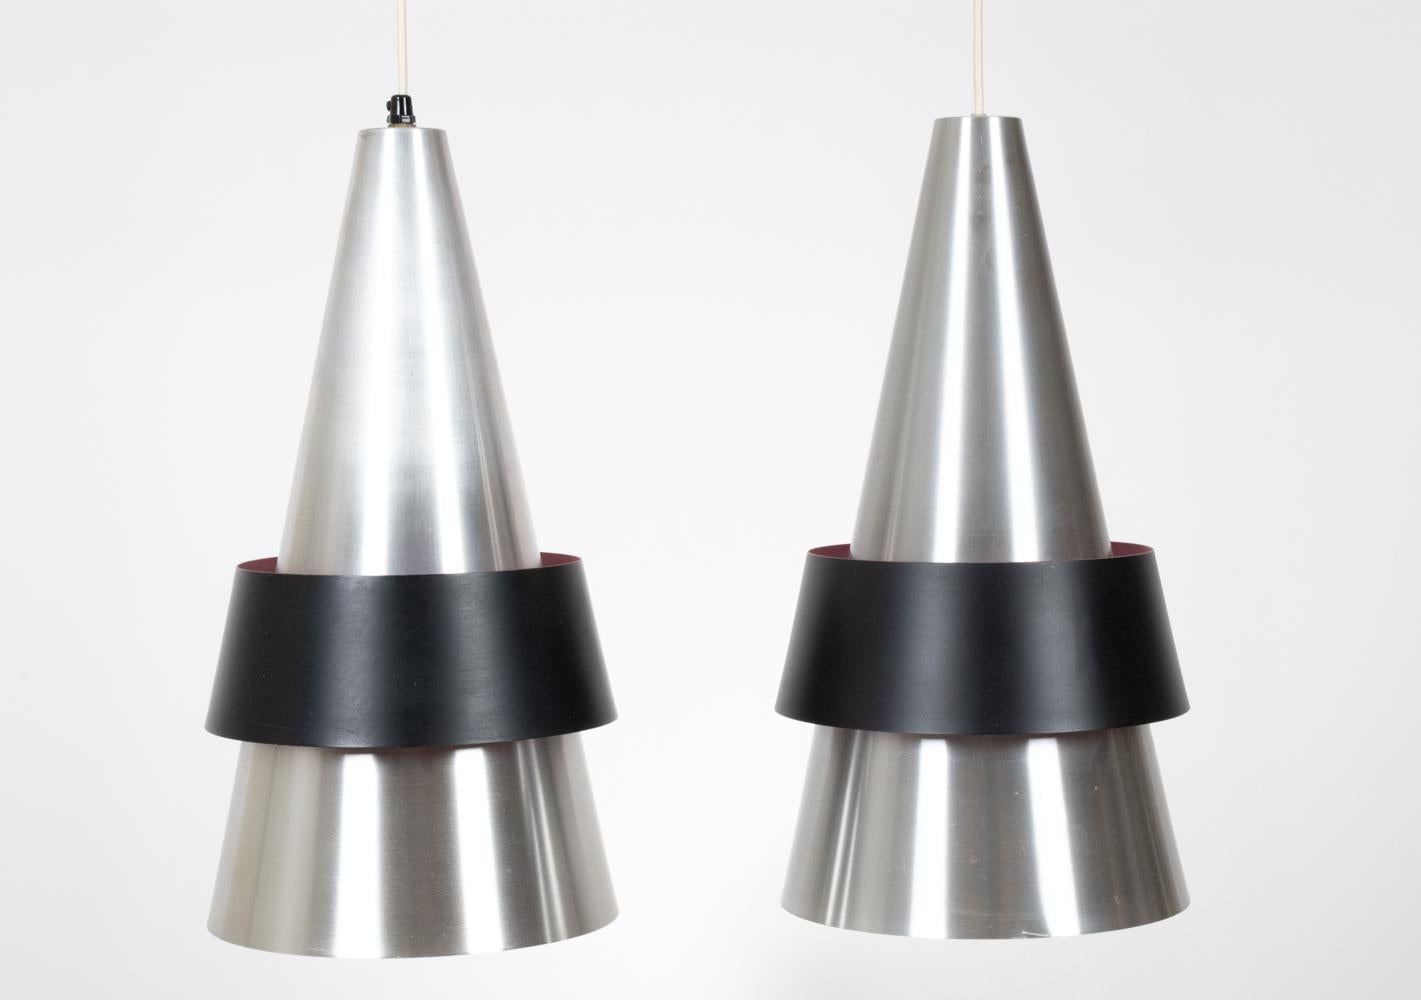 A striking pair of Scandinavian midcentury conical pendant lights in brushed aluminum and black powder coated shades, with sprayed pink interiors. Designed by Jo Hammerborg for Fog & Morup, circa 1963, these model 